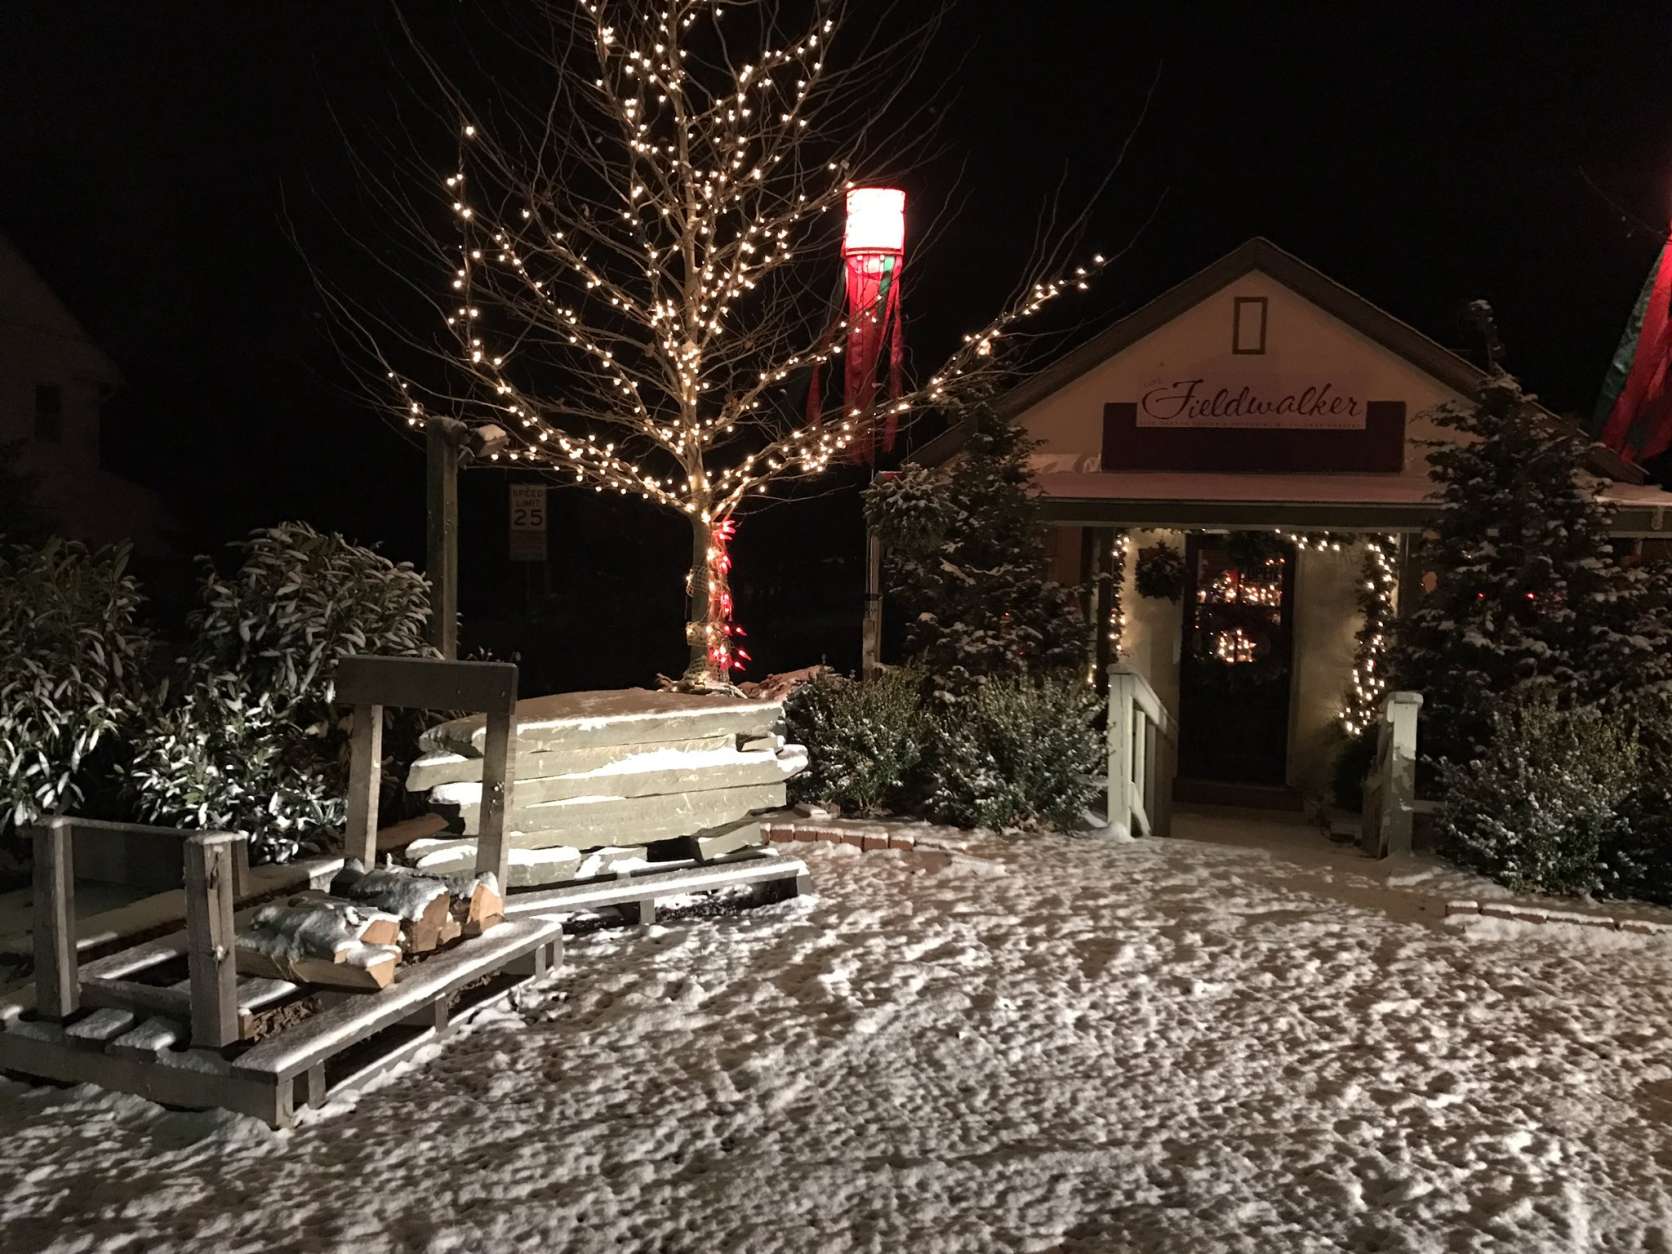 Picturesque snow on the Purcellville-Hamilton border, in Virginia. (WTOP/Neal Augenstein)